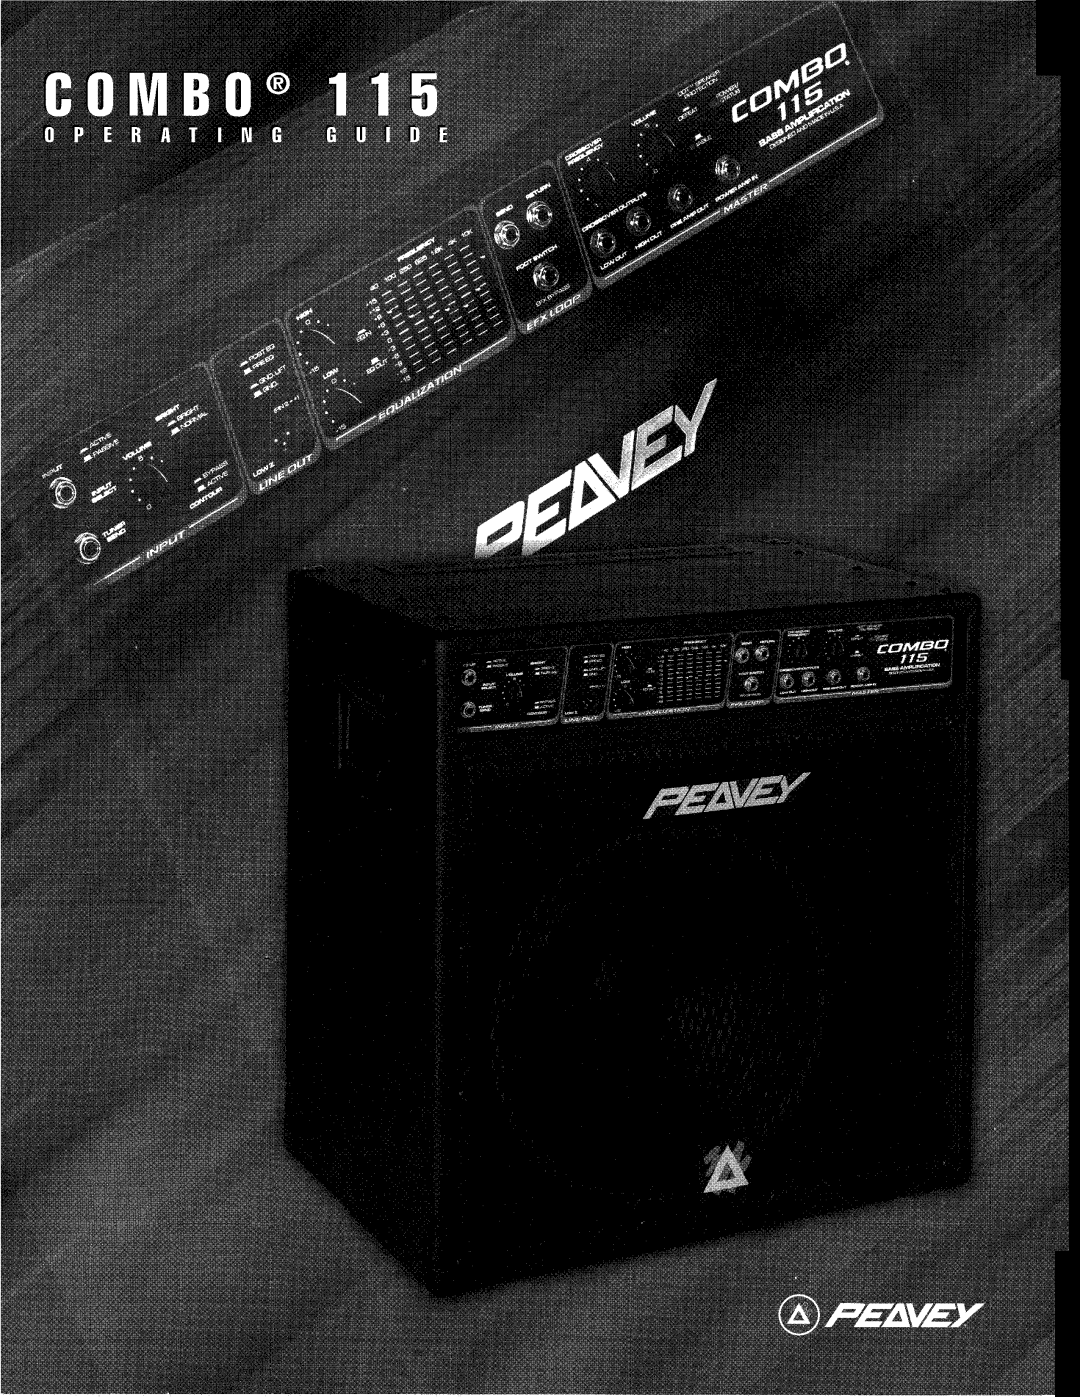 Peavey specifications Specifications, VB 115 Bass Cabinet 